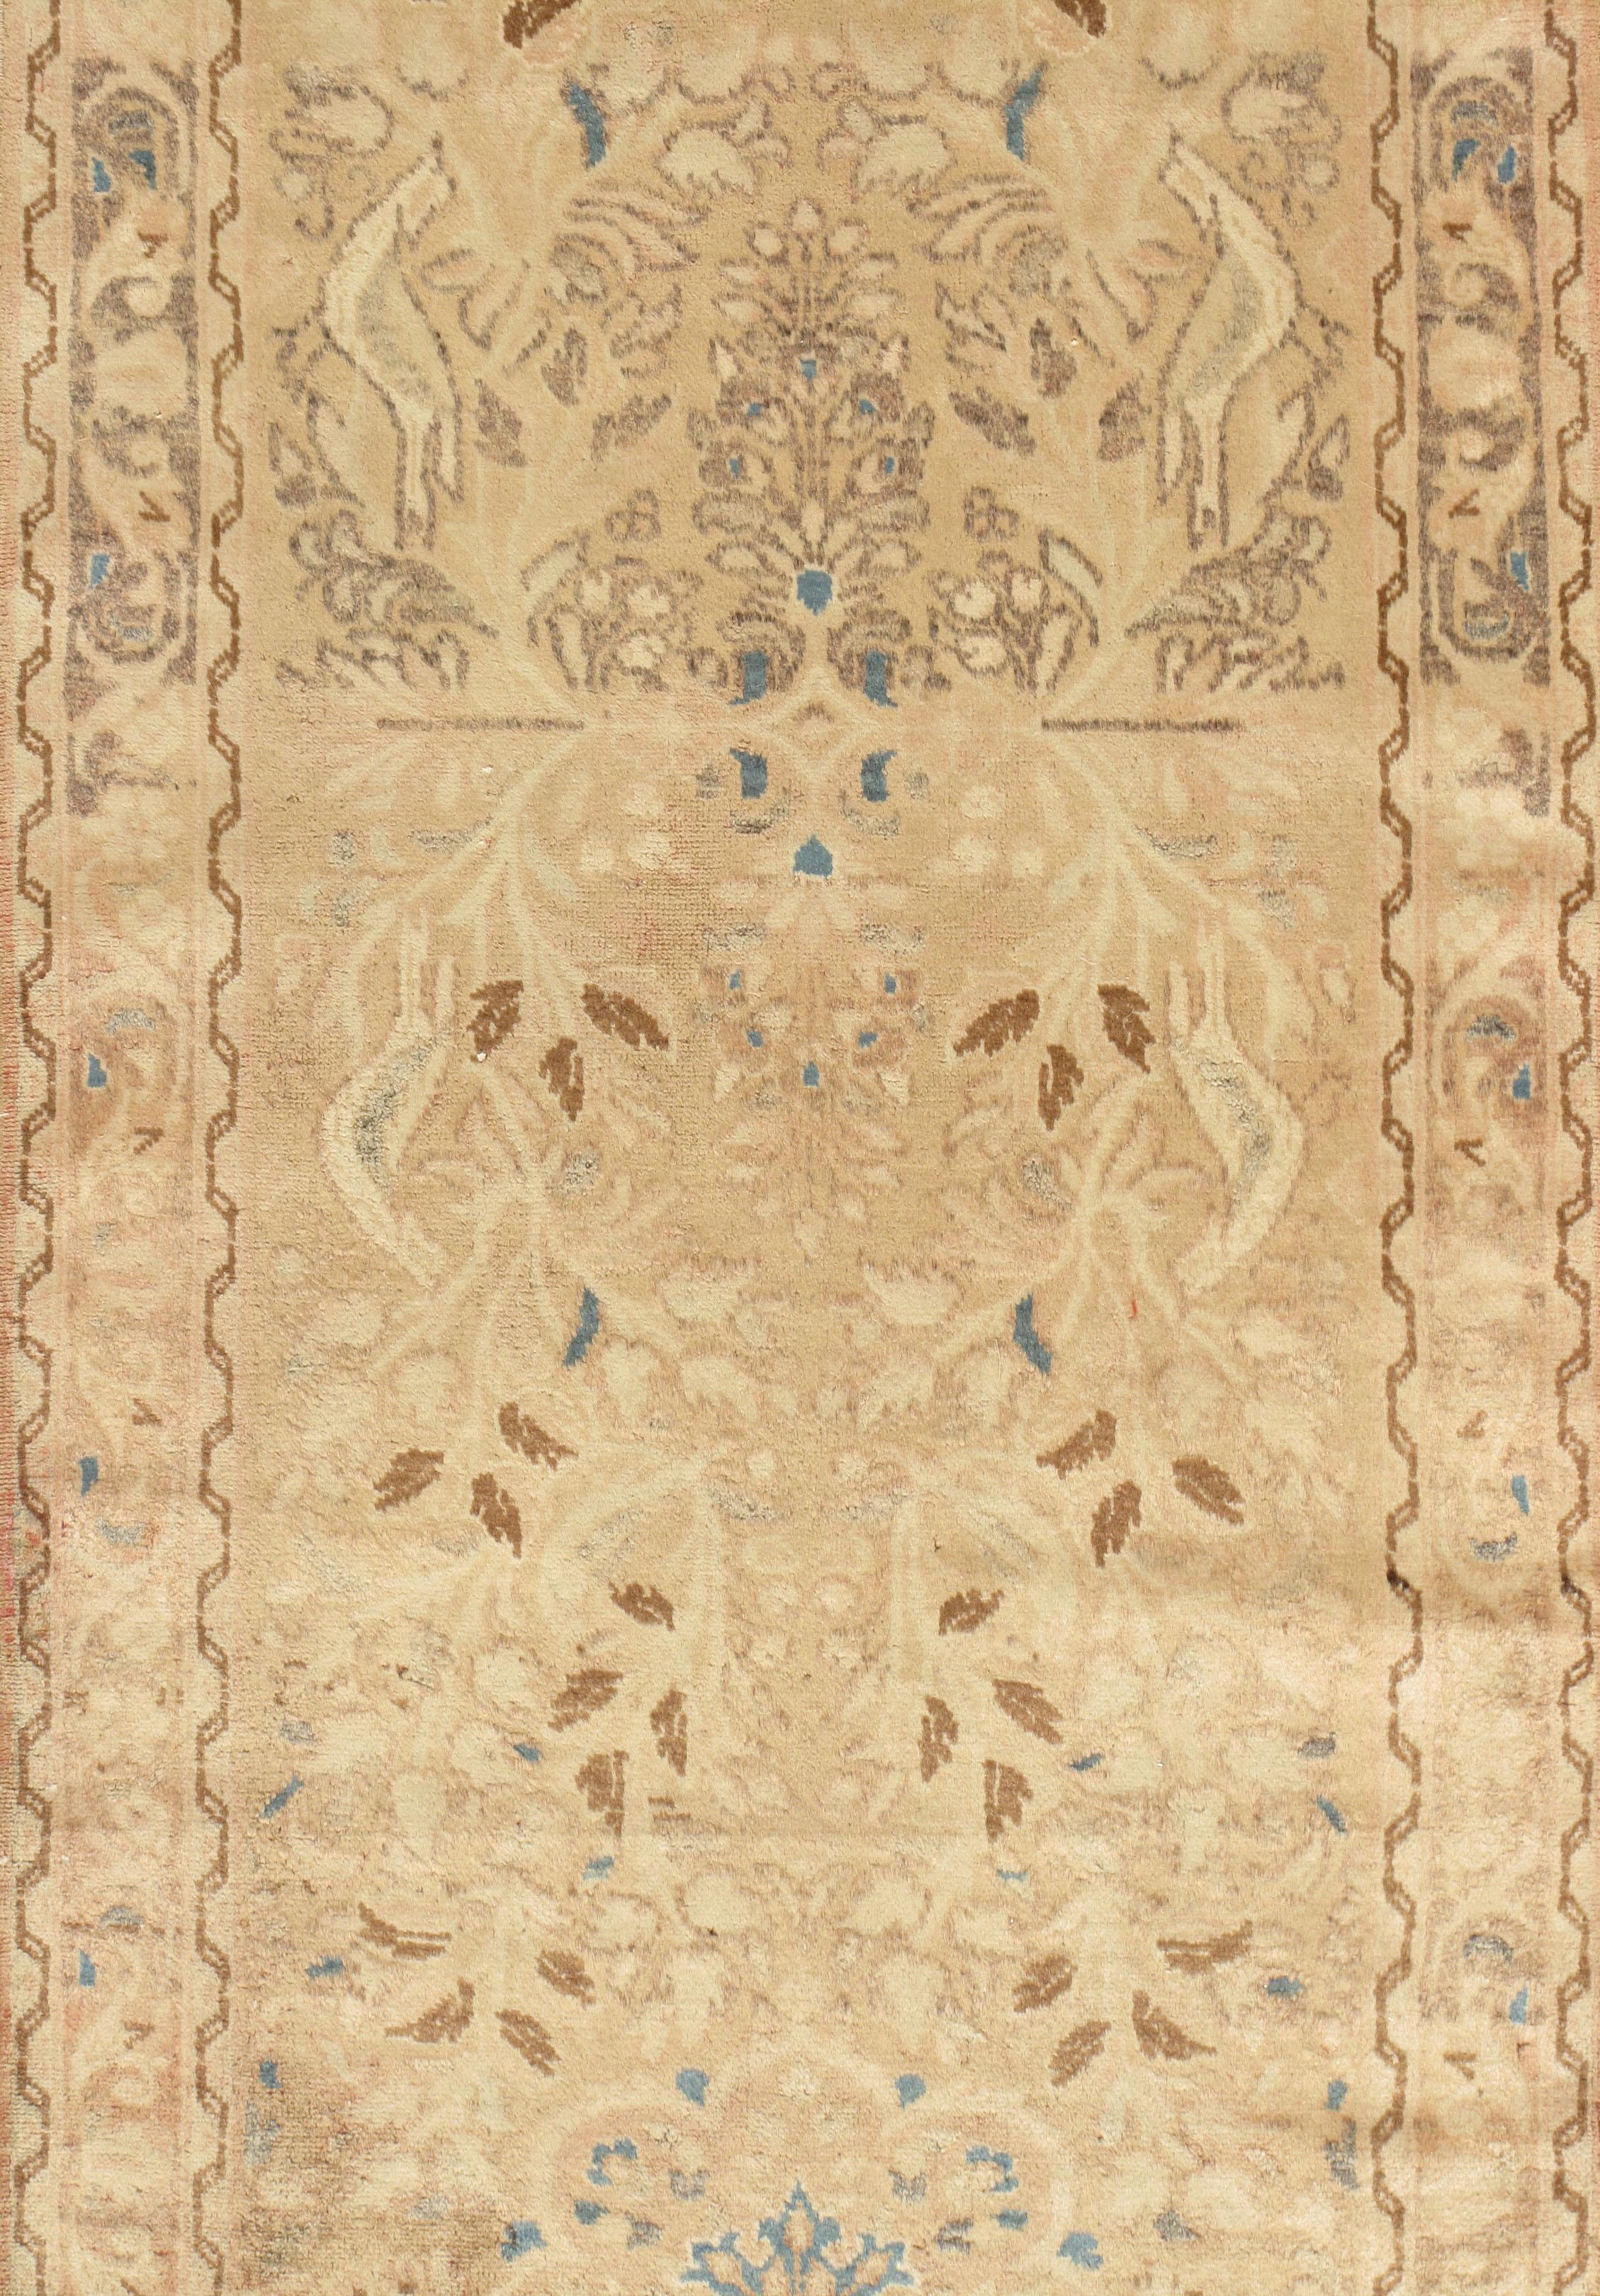 Large Persian Lilihan runner, circa 1930, 2'6 x 24'4.  A lovely runner from Persia light in color and with wonderful soft detail in the design. This runner can work in a wide variety of settings creating a soft ambiance.